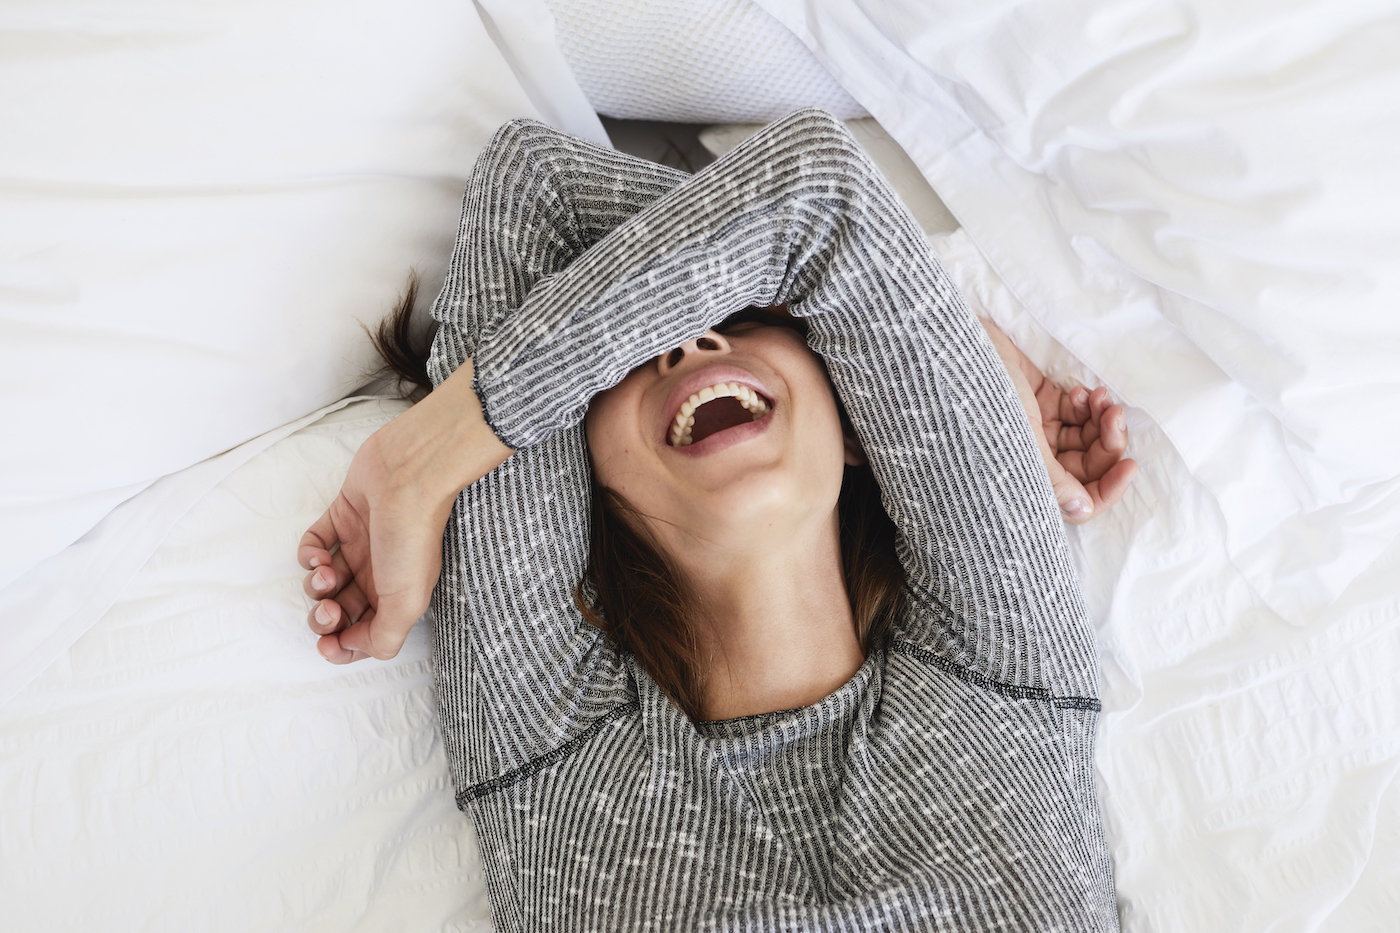 A woman wearing a gray shirt lies on a bed and smiles with her arms crossed over her head, covering her eyes.